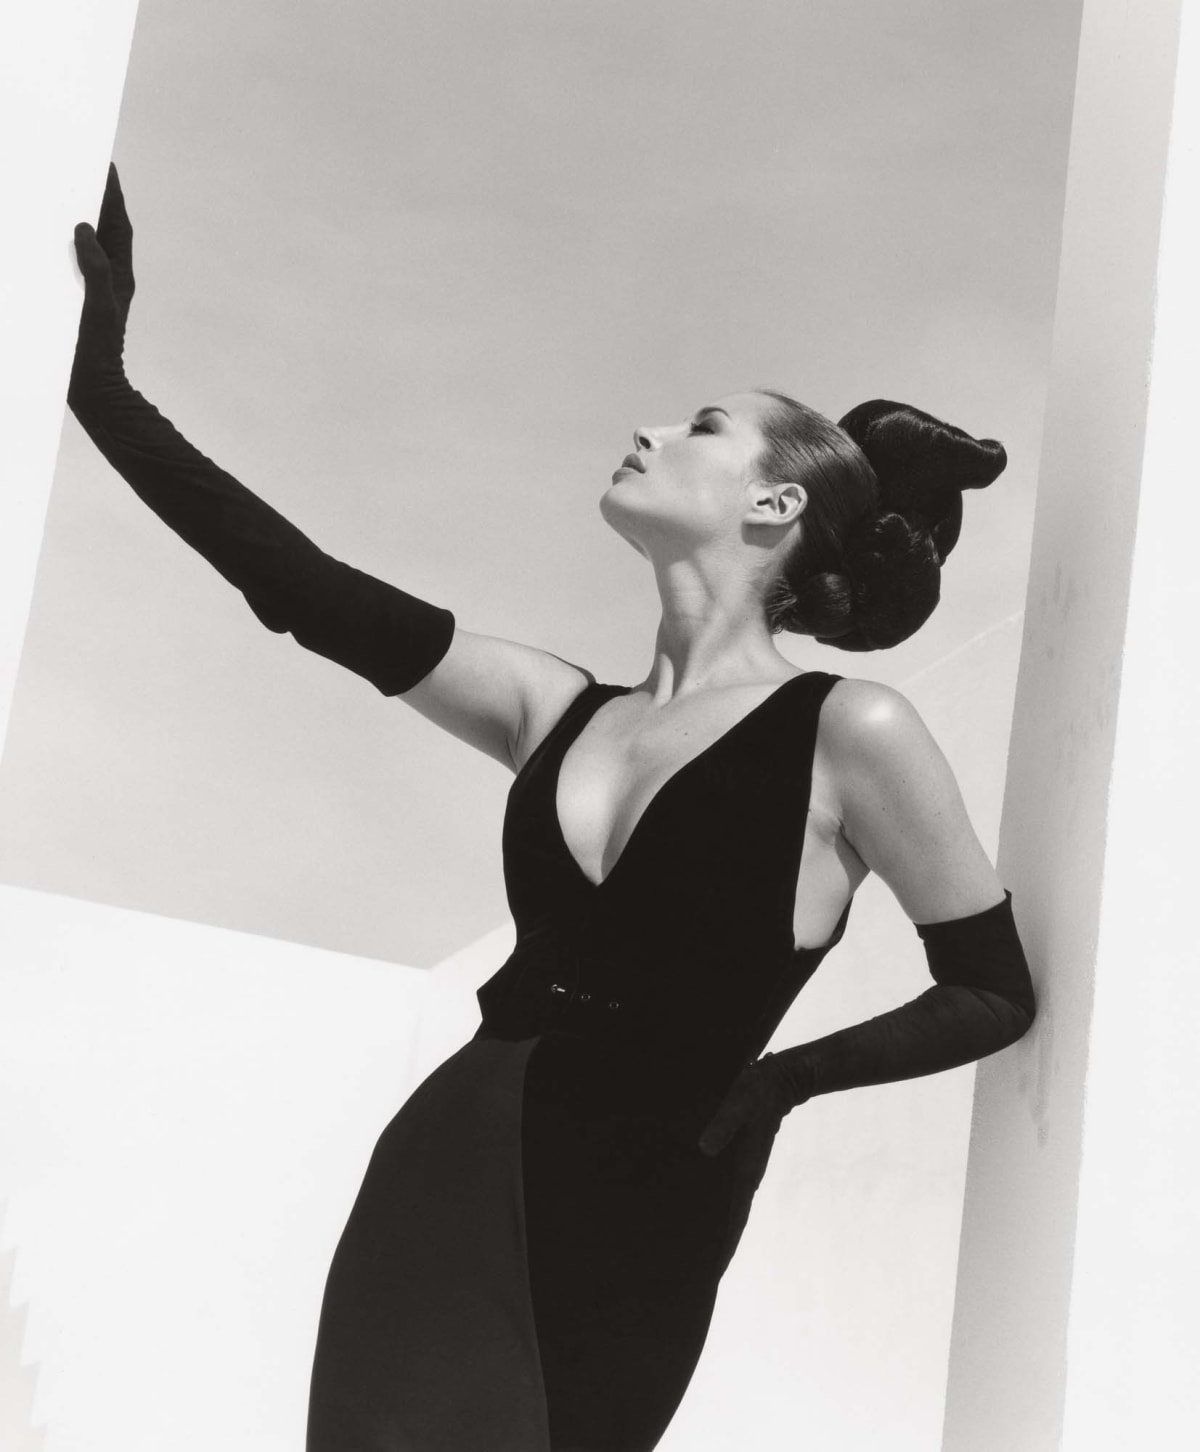 Christy Turlington in Valentino gown and gloves, posing in geometric doorway, by Herb Ritts